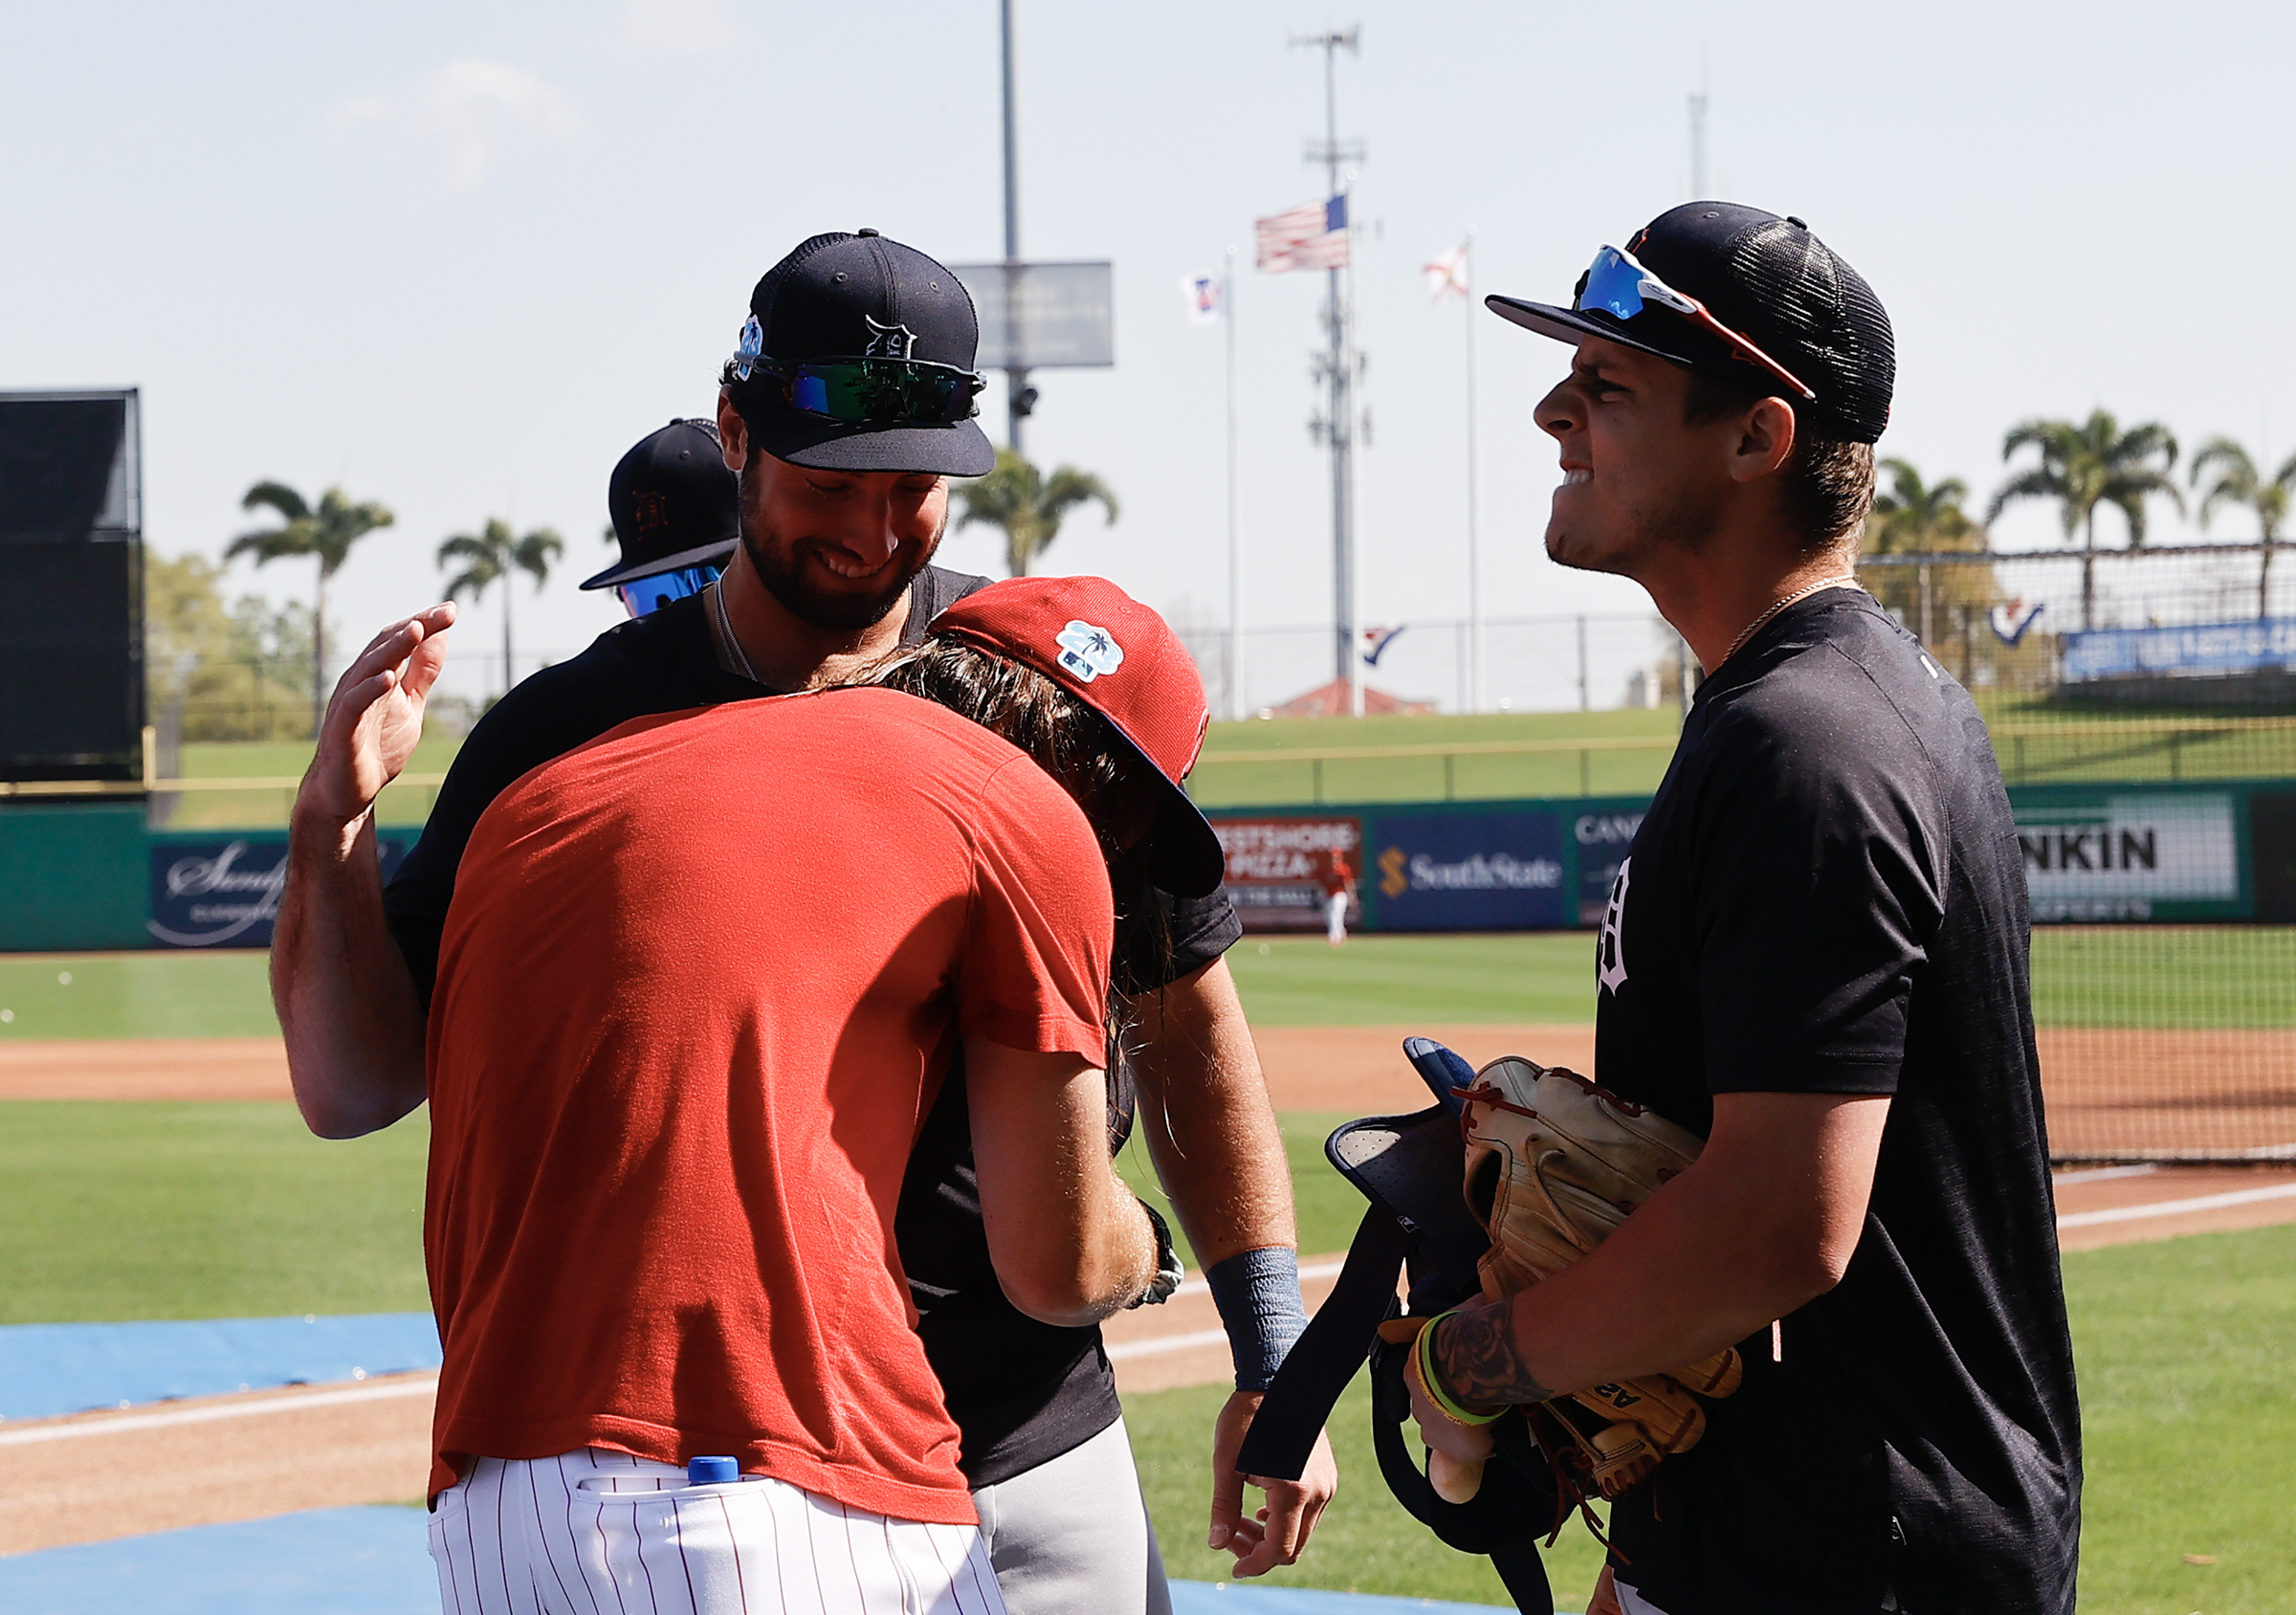 New Tigers Nick Maton and Matt Vierling are no longer Phillies, but their  friendships endure